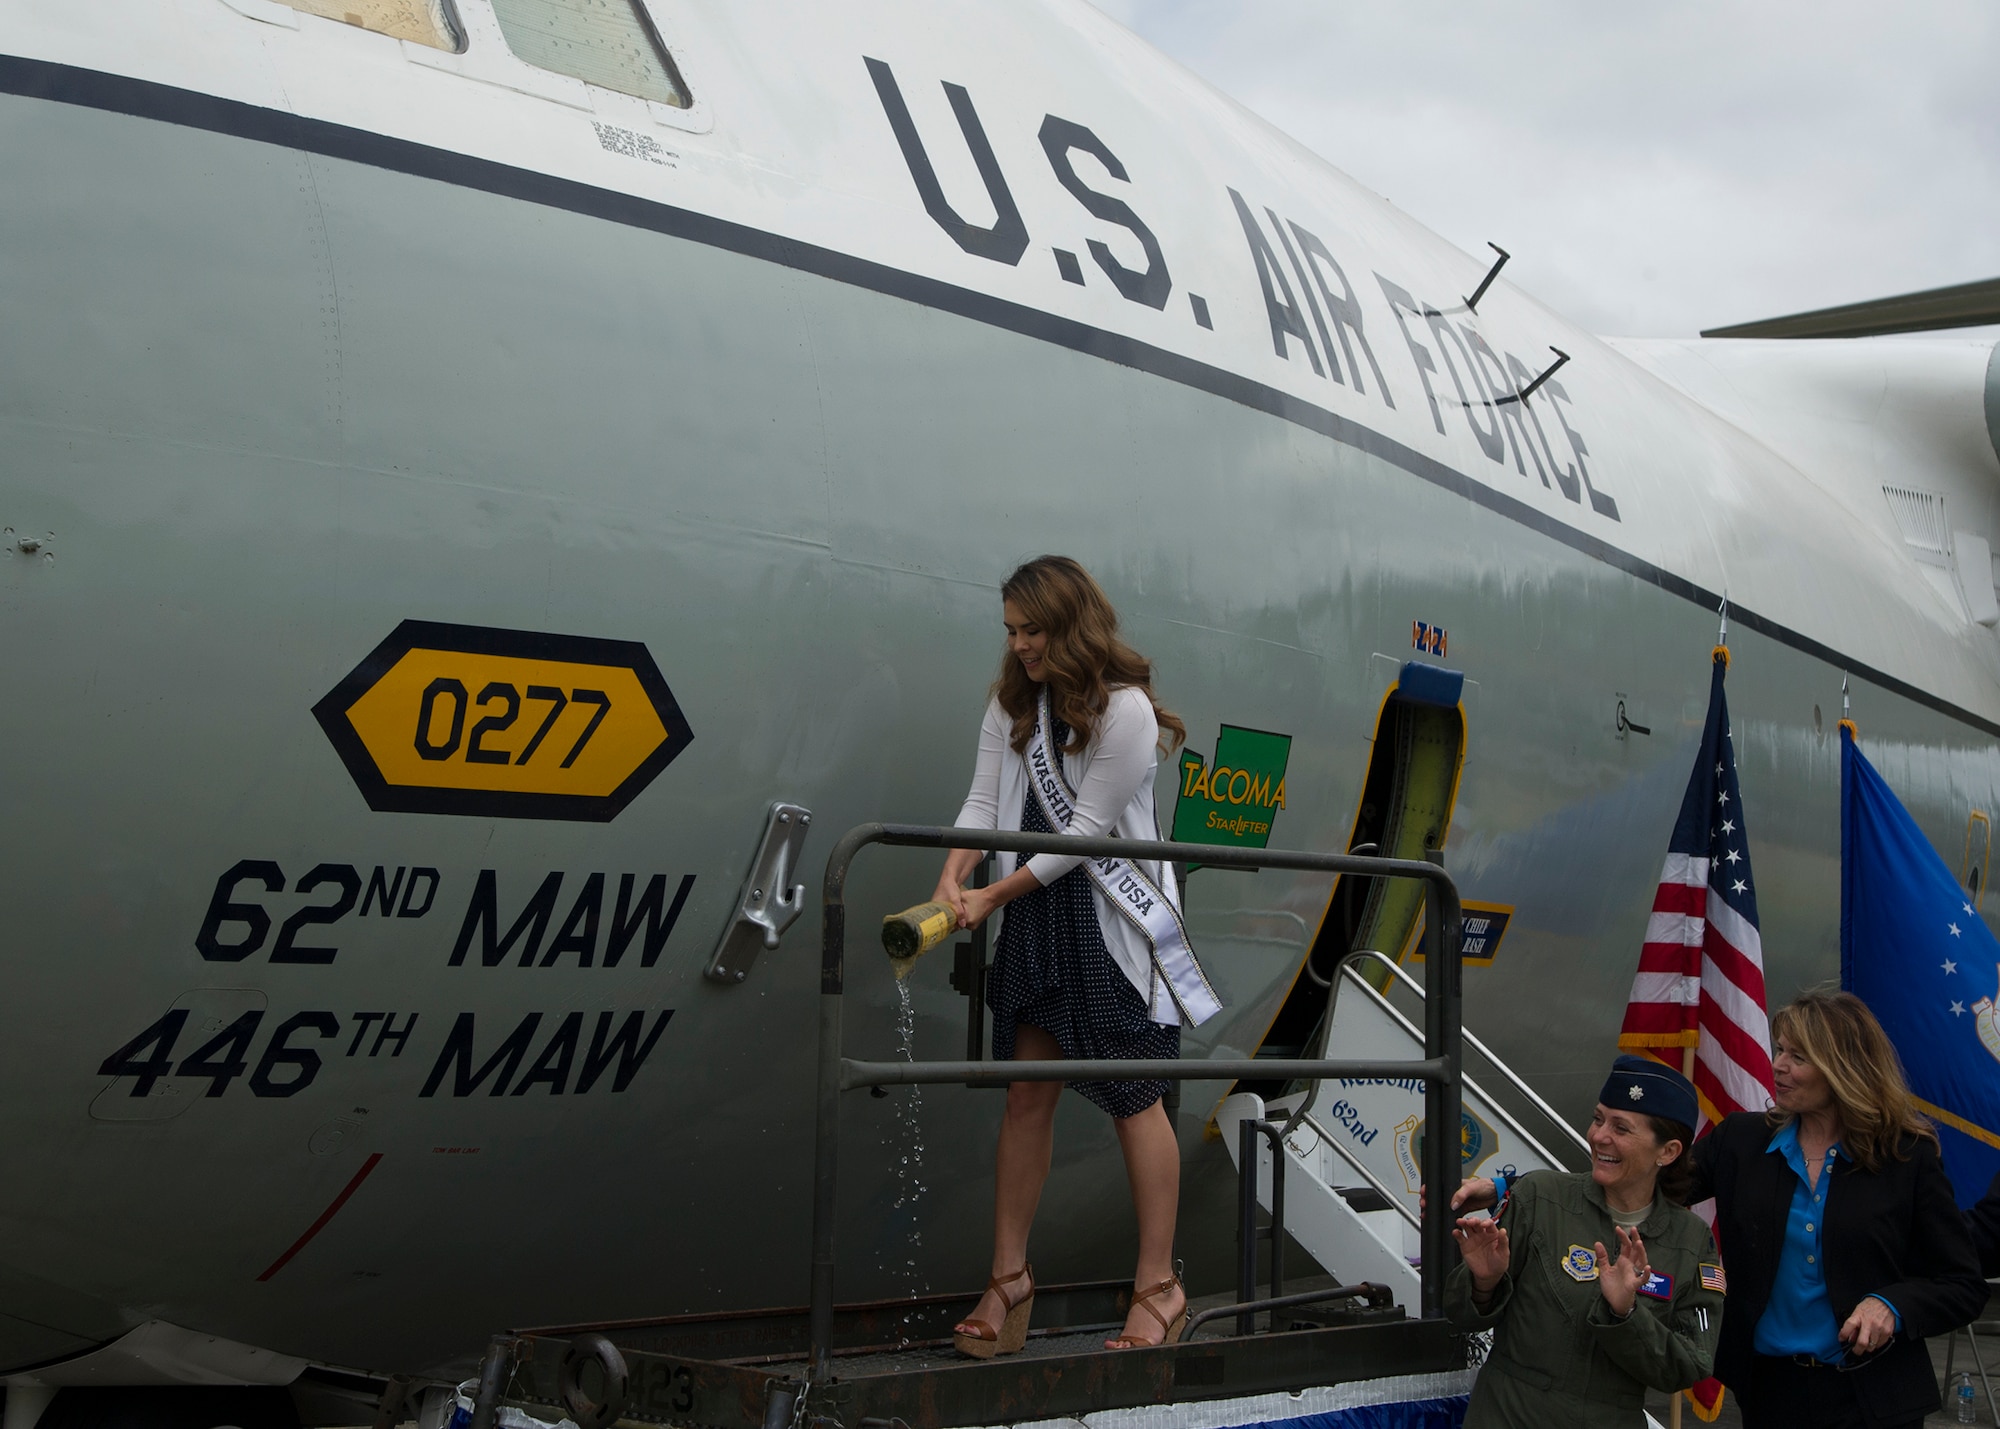 Kelsey Schmidt, Miss Washington 2016, rechristens the C-141 Starlifter, serial number 65-0277, August 6, 2016, at Heritage Hill, Joint Base Lewis-McChord, while Lt. Col. Elizabeth Scott, commander 4th Airlift Squadron, and Sandra Marth Hill, Miss Washington 1966, look on. In honor of the first C-141 arrival at McChord, members of the 62nd and 446th Airlift Wings celebrated with museum volunteers, veterans, and community members for the 50th anniversary of the arrival of McChord's first C-141. (Air Force Reserve photo by Tech. Sgt. Bryan Hull)